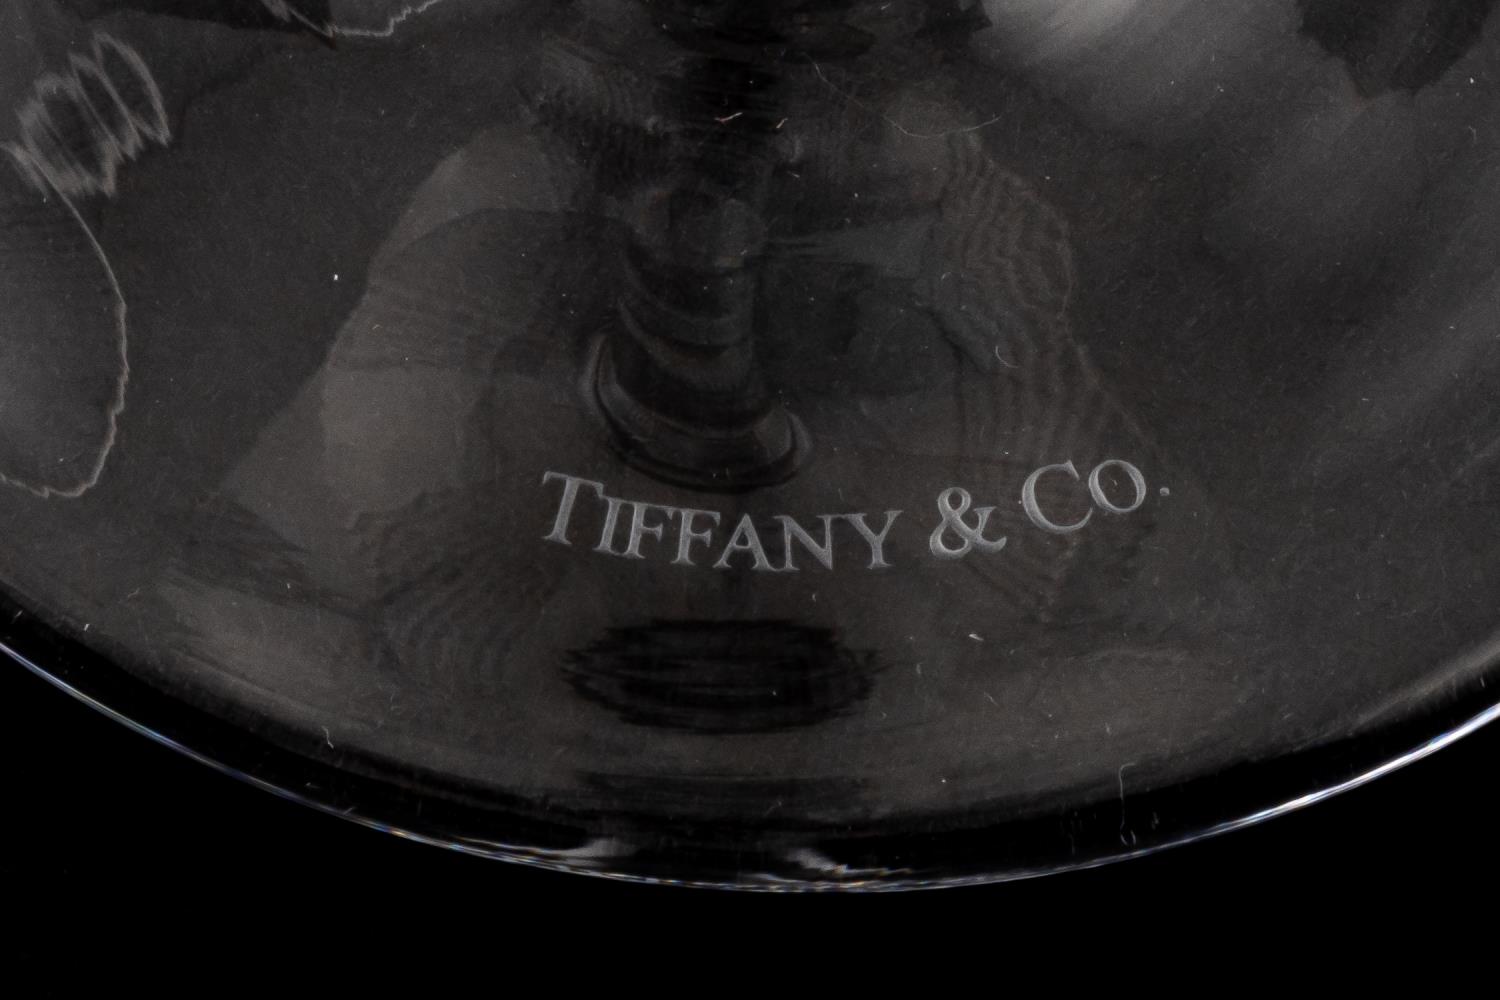 SEVEN TIFFANY & CO. ETCHED MARTINI GLASSES - Image 5 of 6